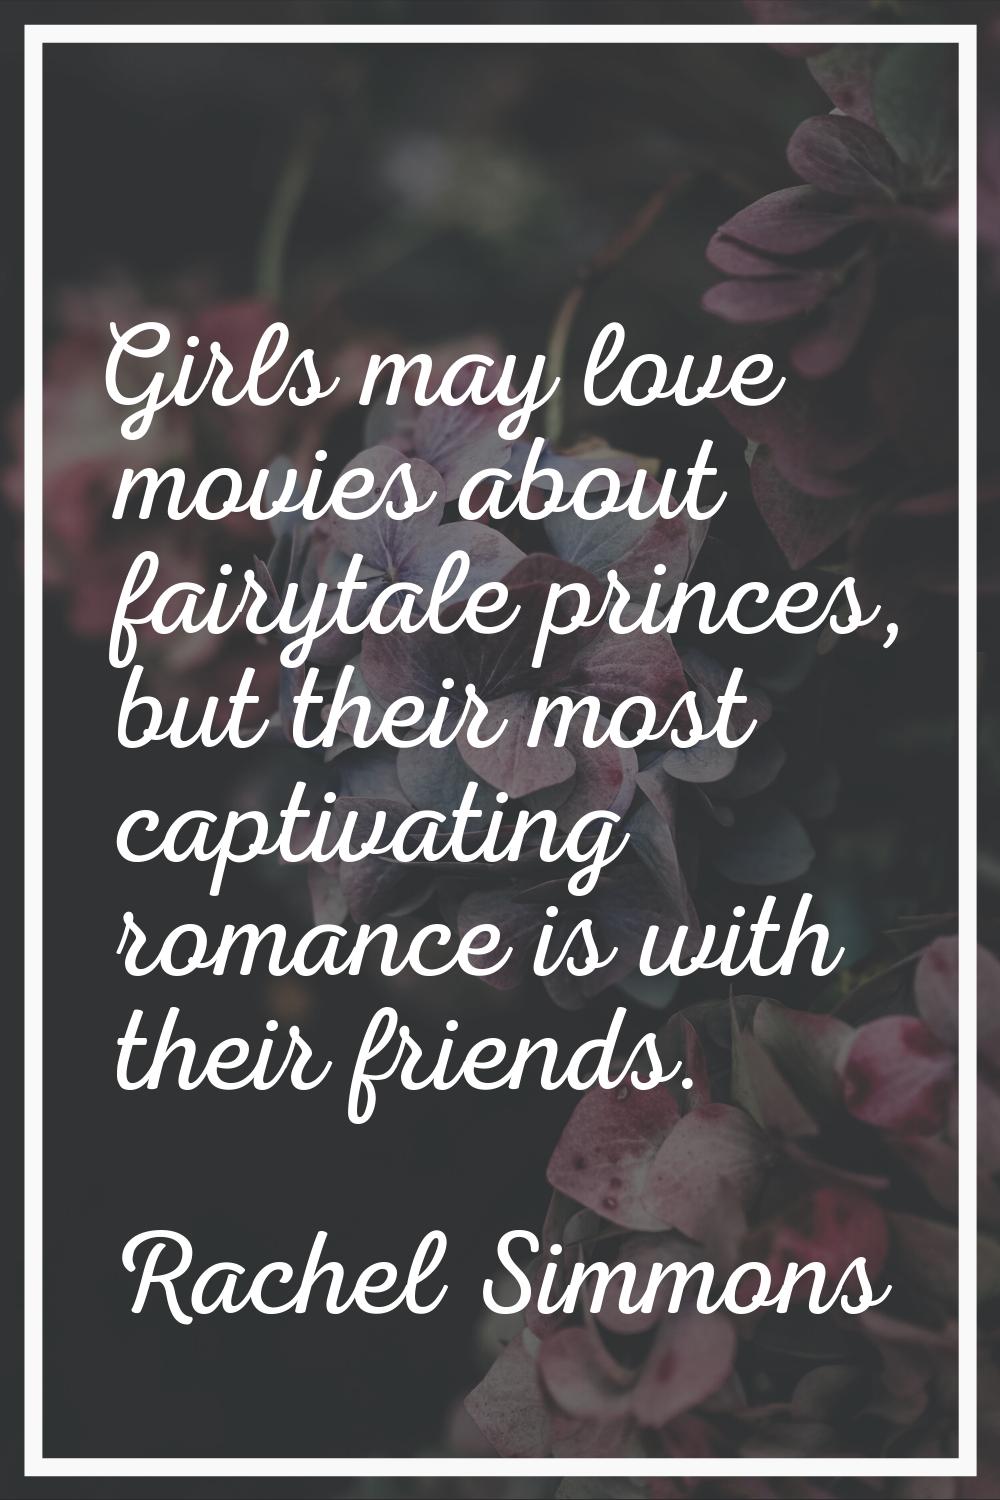 Girls may love movies about fairytale princes, but their most captivating romance is with their fri